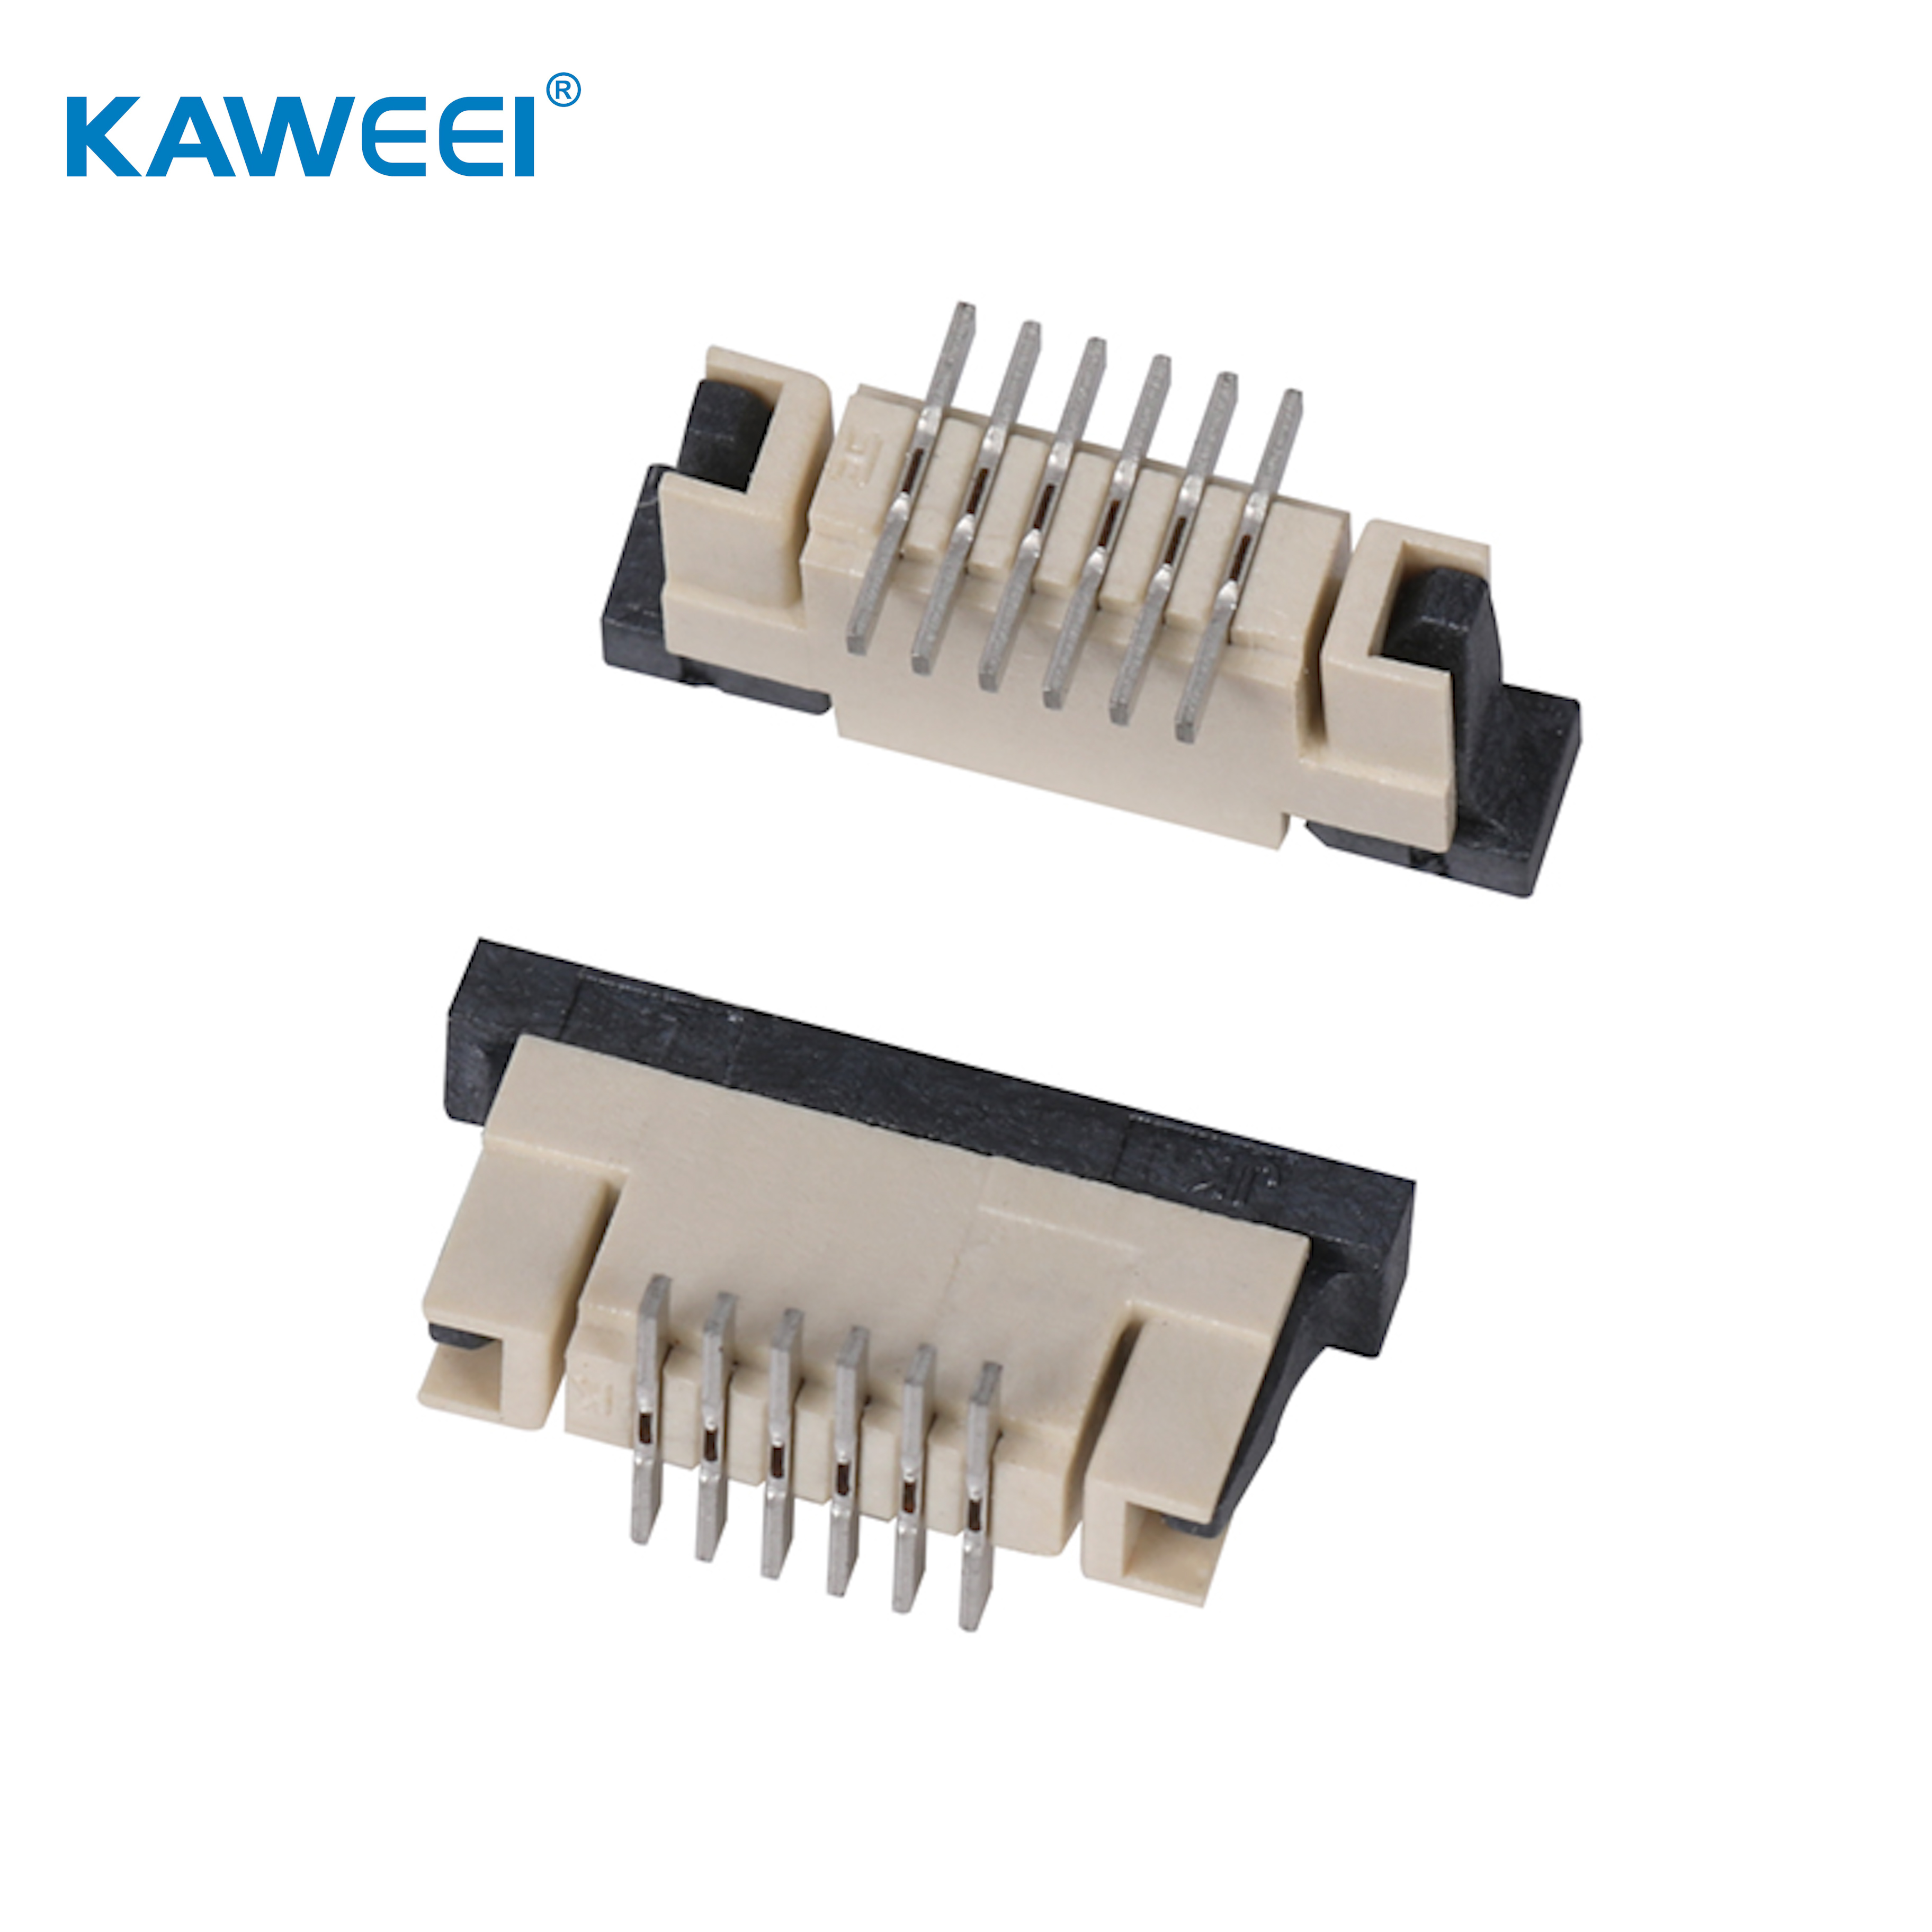 1.0mm pitch ffc/fpc zip vertical connector type SMT wire to board connector